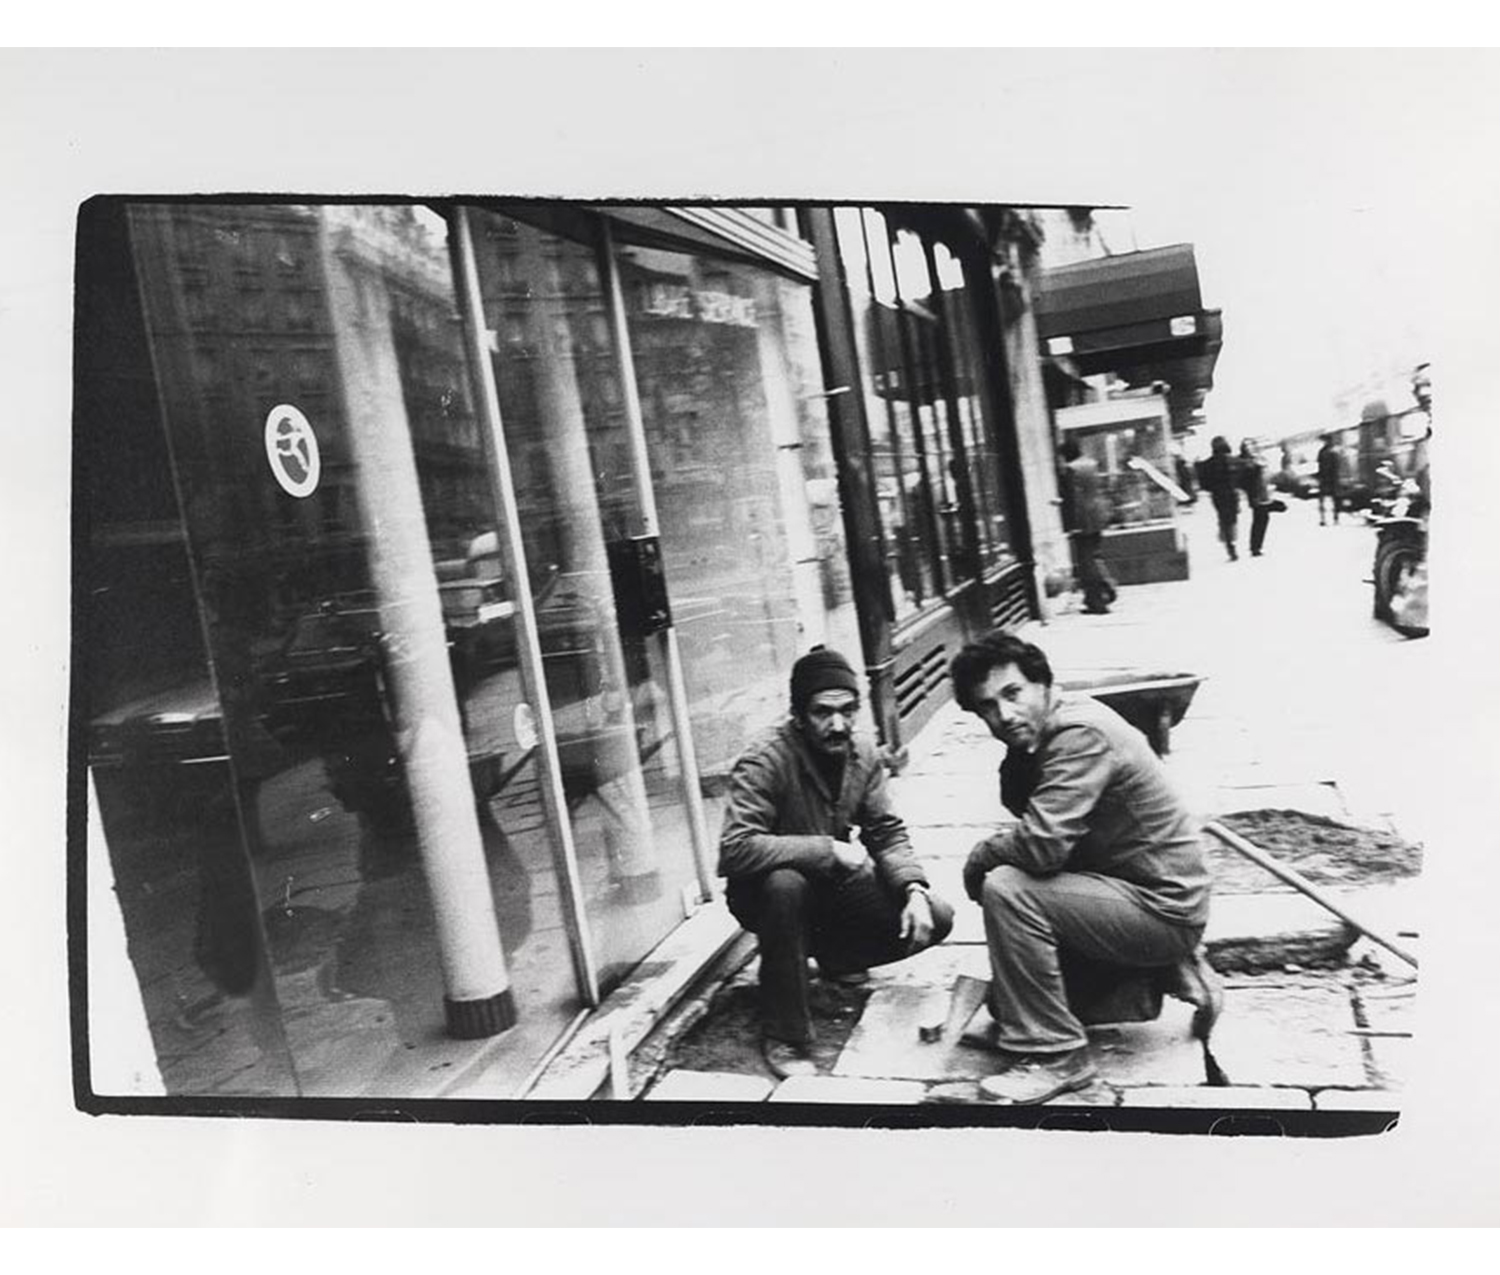 two men kneeling down next to each other on a busy city street, in front of a store